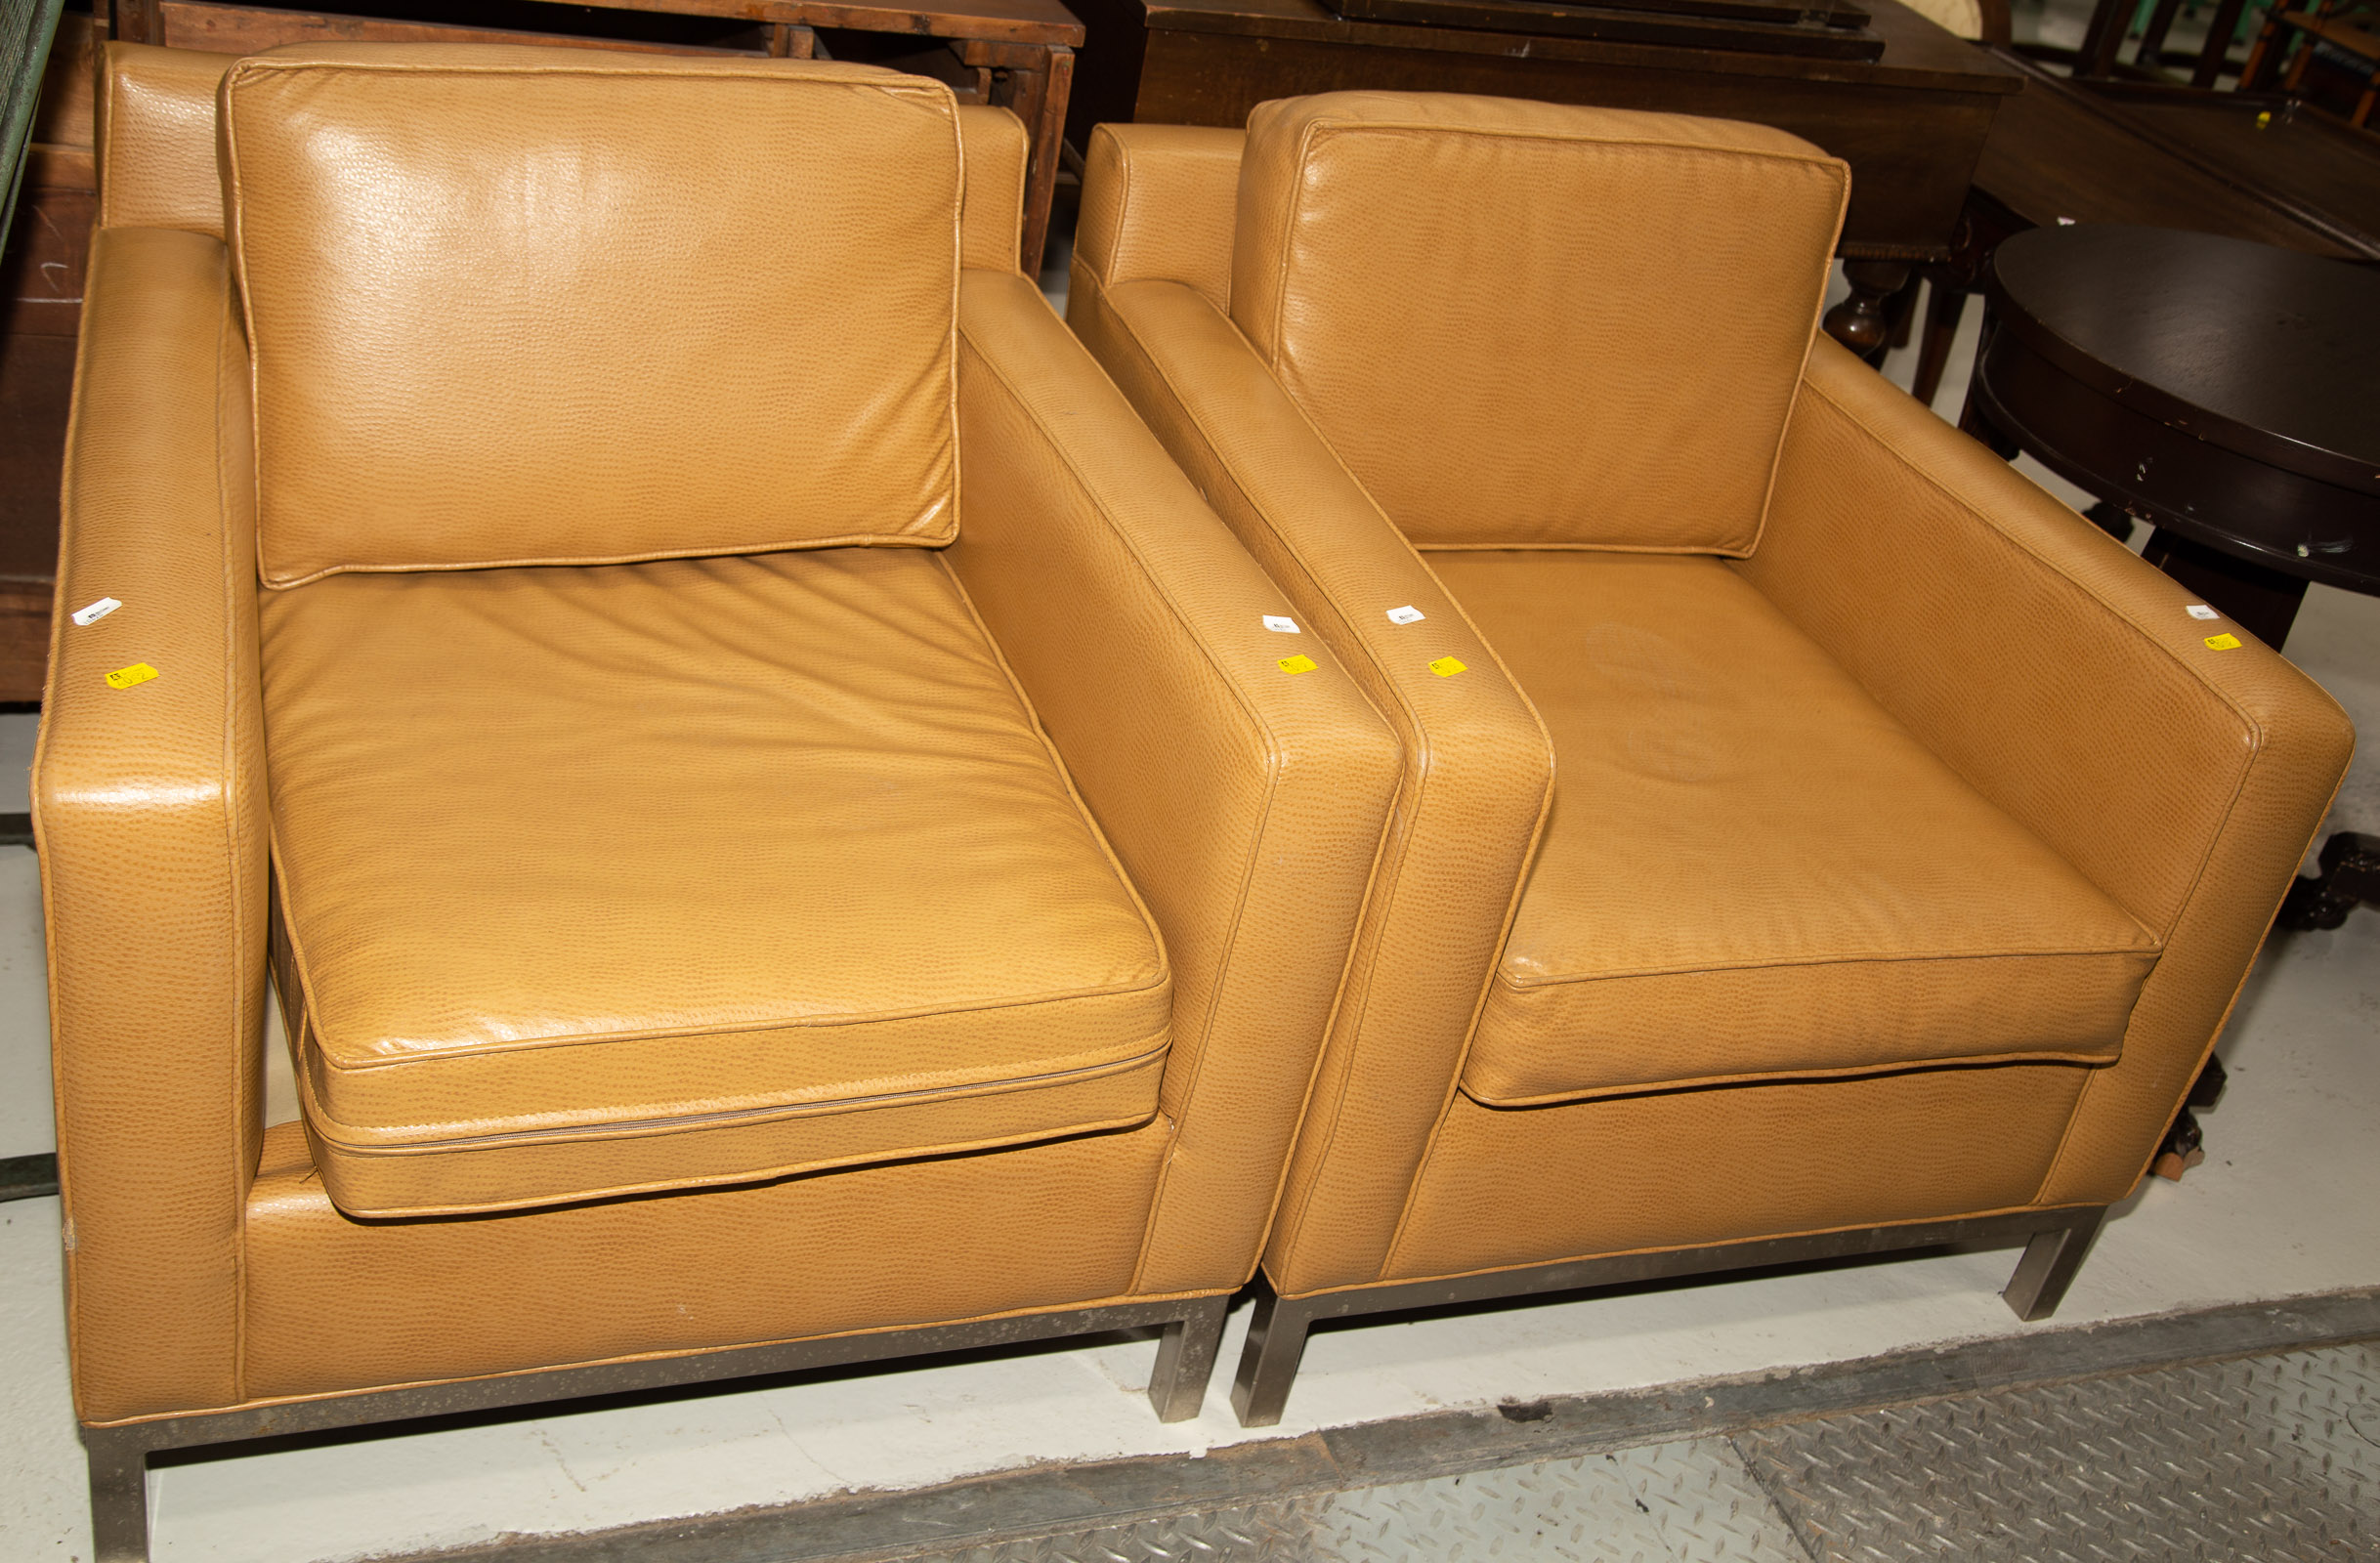 A PAIR OF MODERN STYLE CLUB CHAIRS 338a91